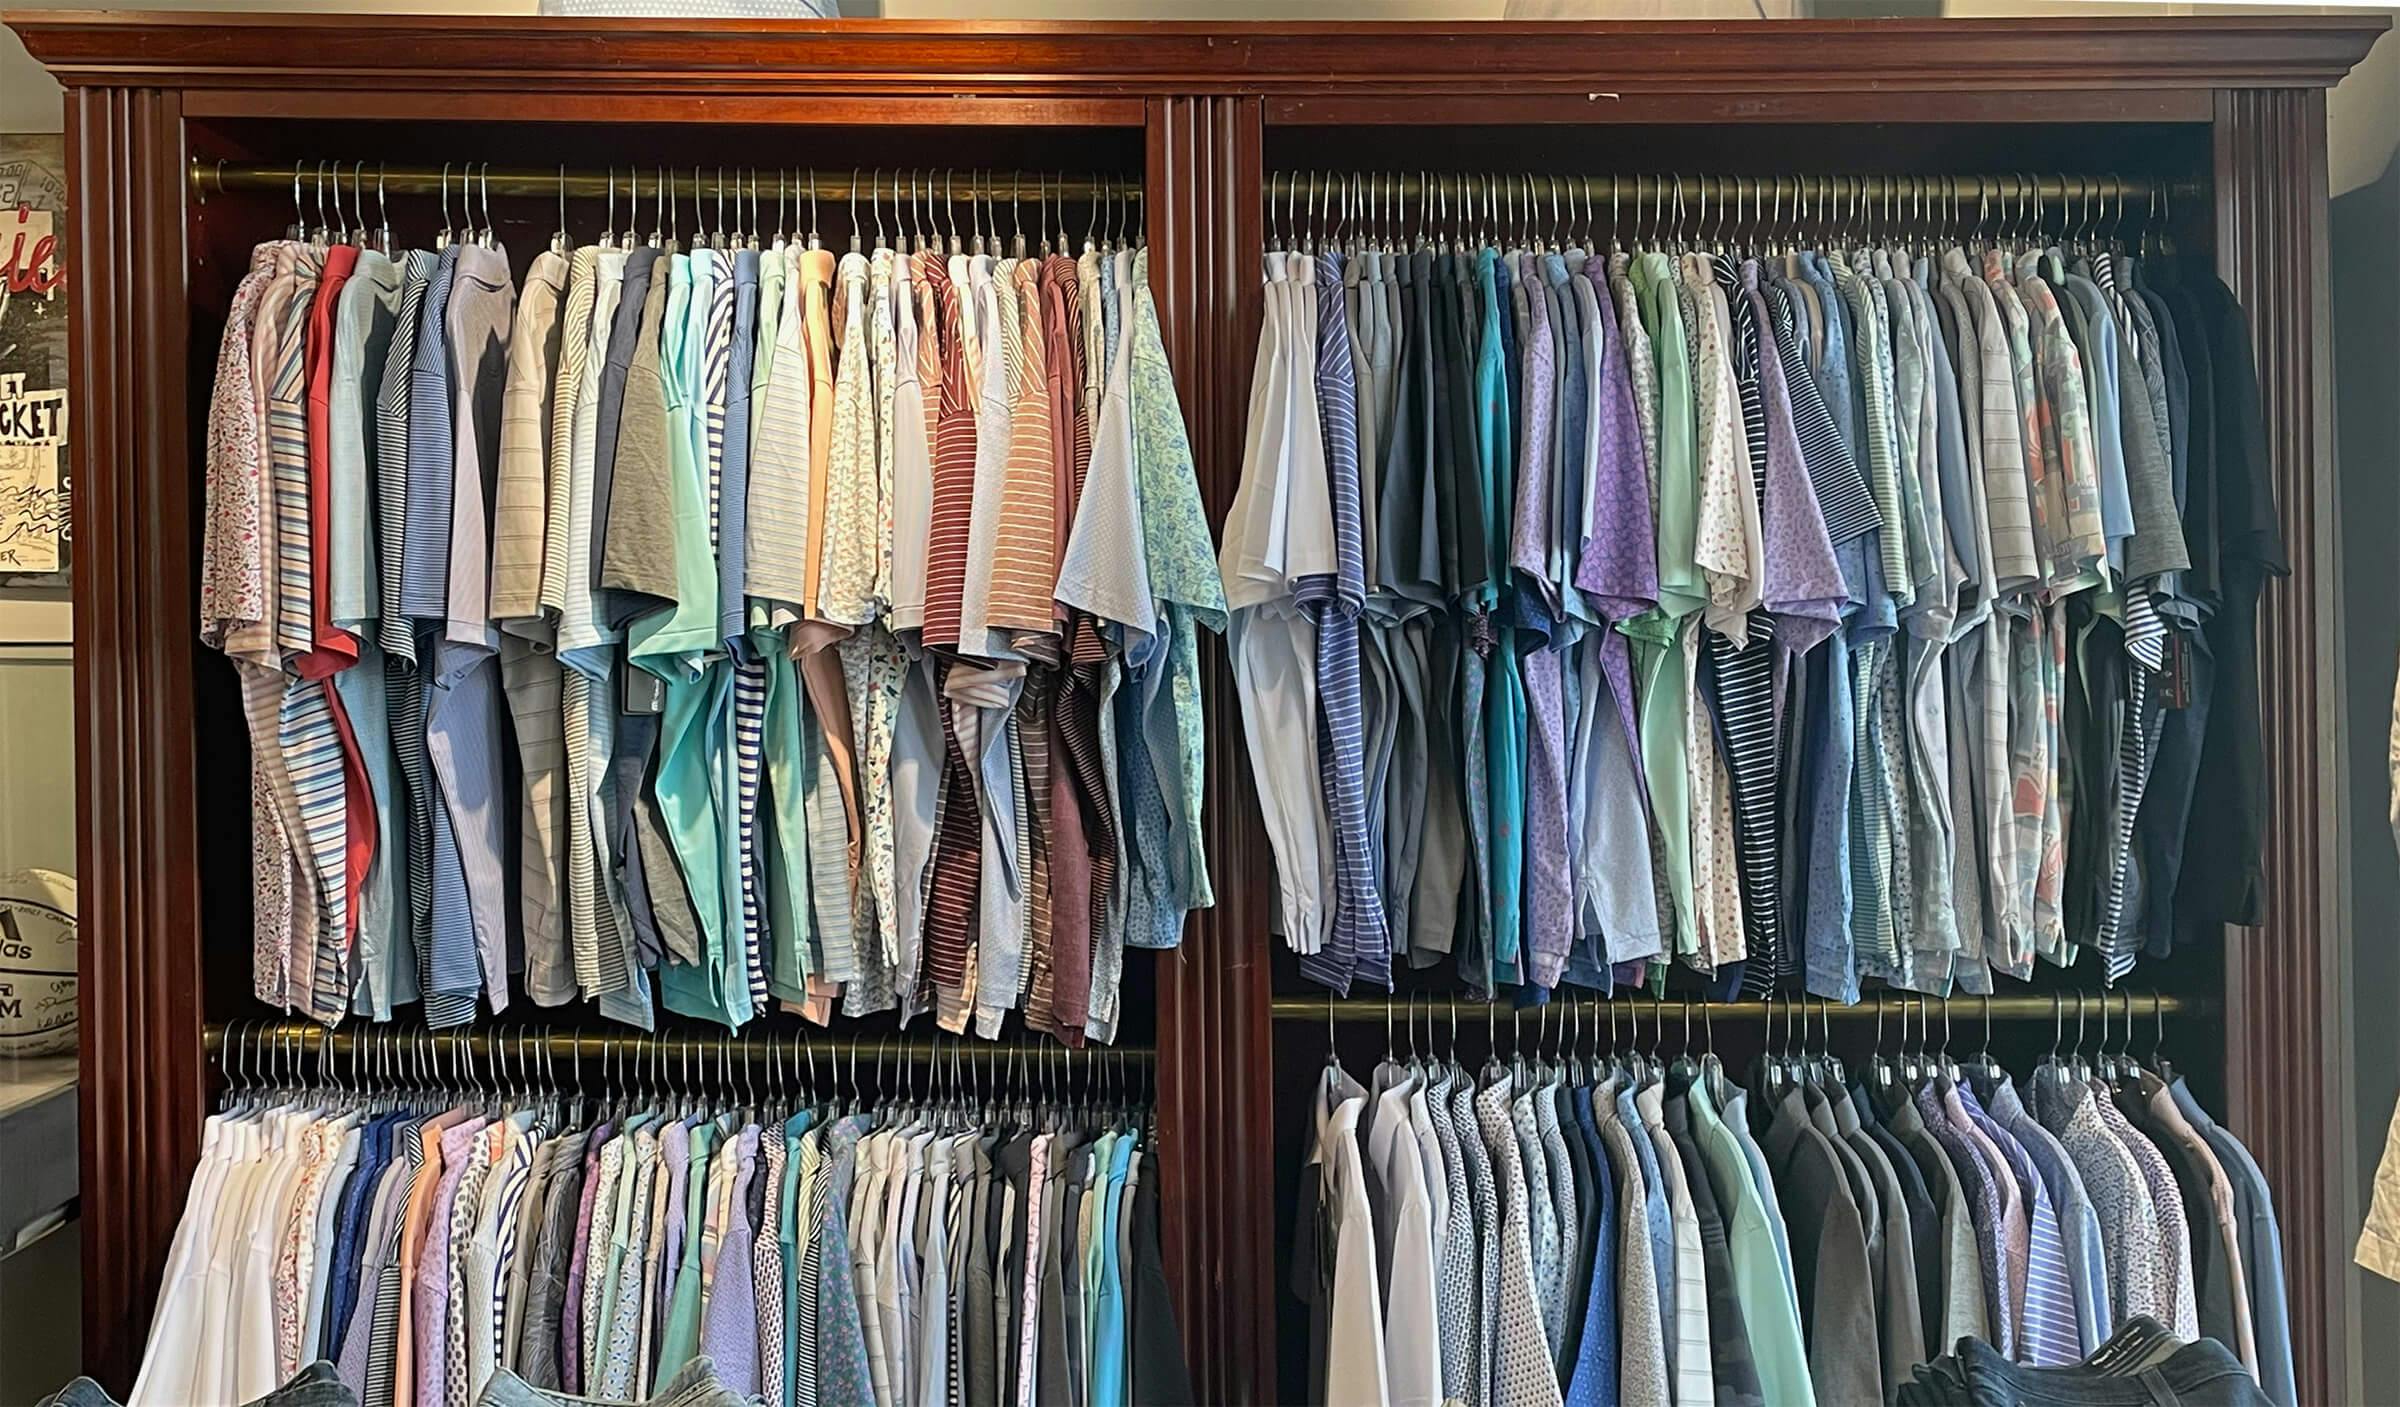 Assorted polo shirts with various patterns and colors.